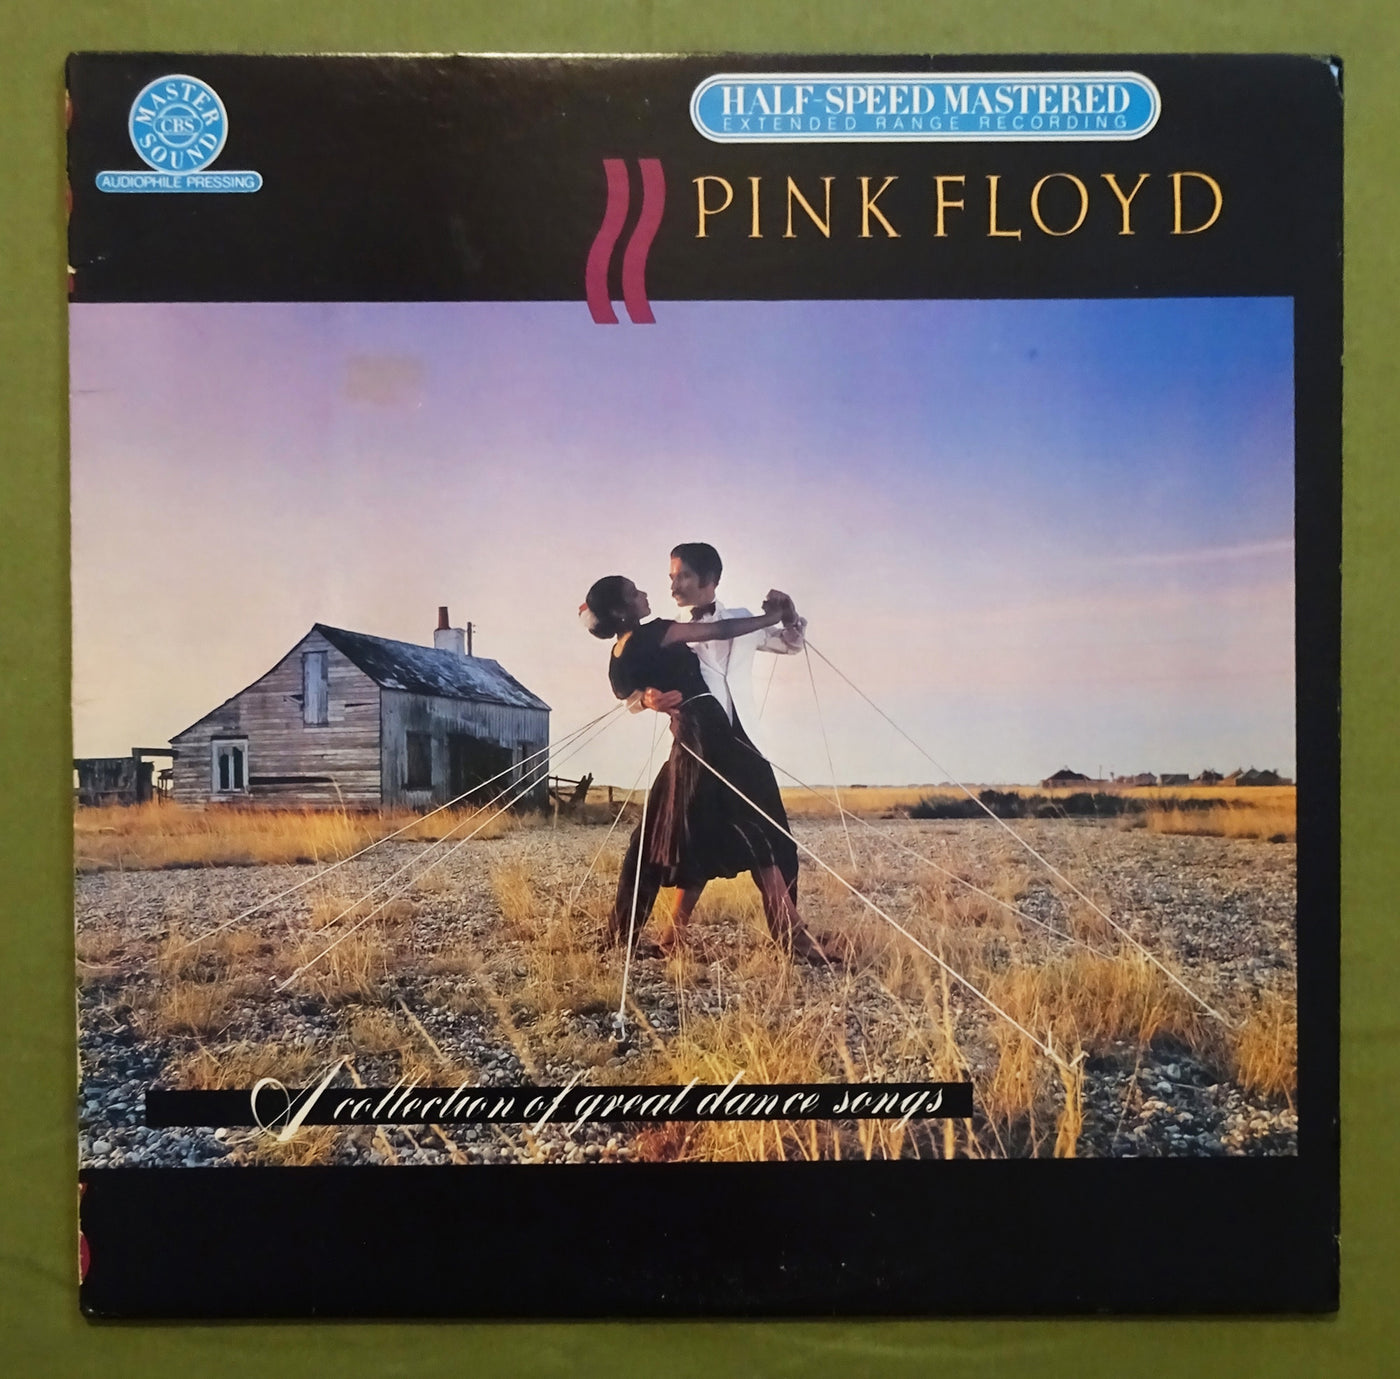 Pink Floyd - A Collection of Great Dance Songs Audiophile Half Speed Master (1981) Vinyl LP 33rpm HBL47680